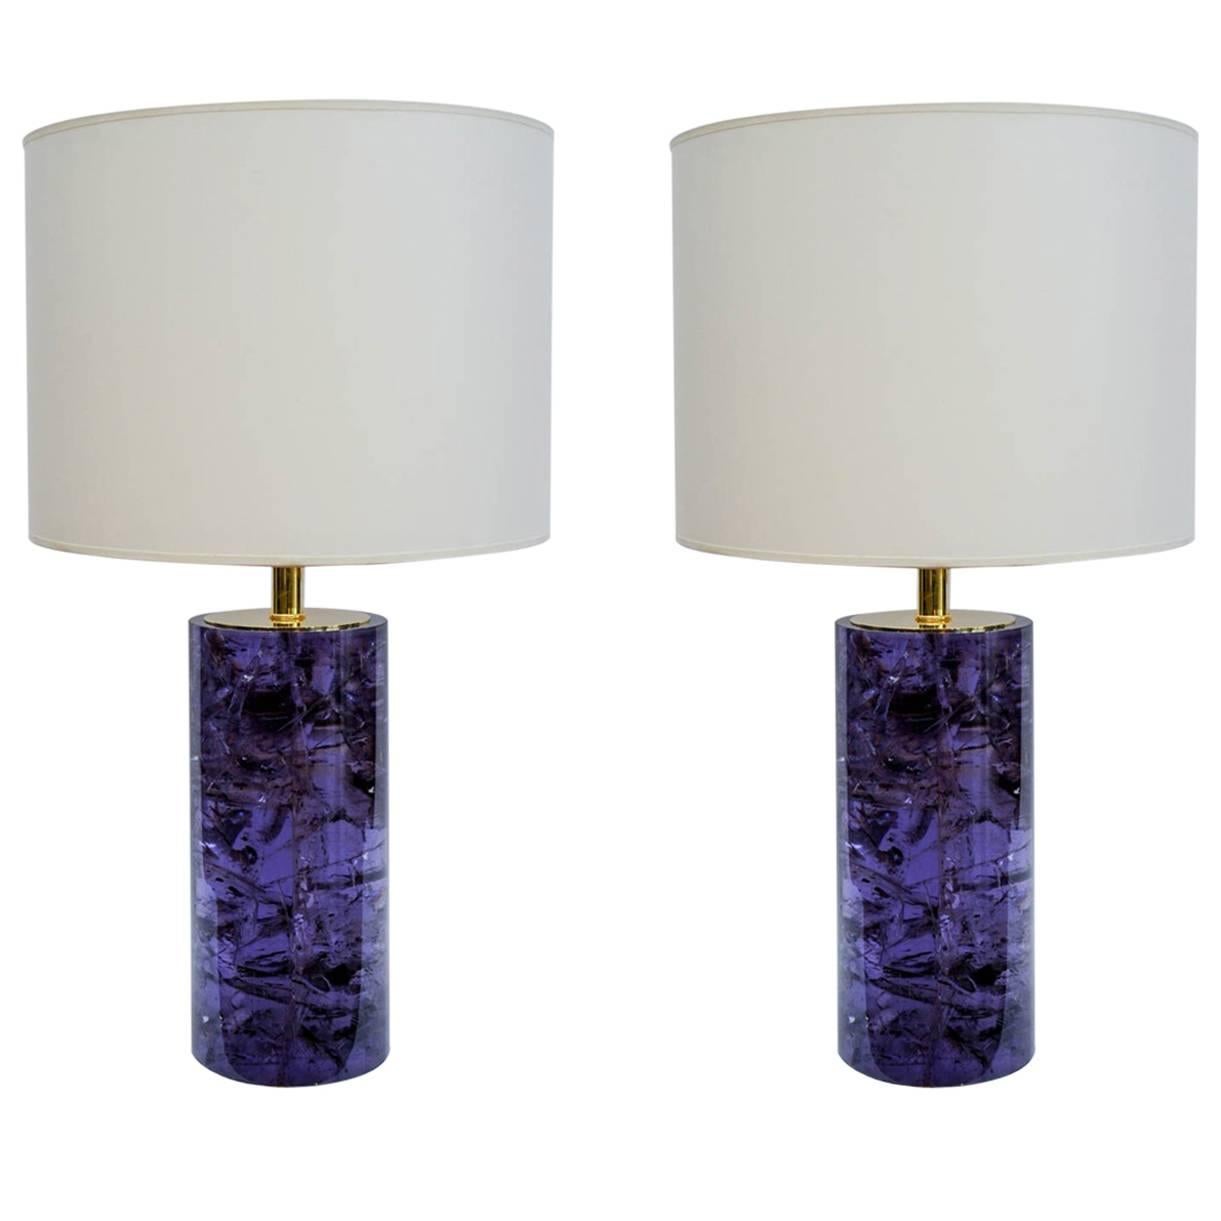 Pair of Vibrant Purple Fractale Resin Table Lamps